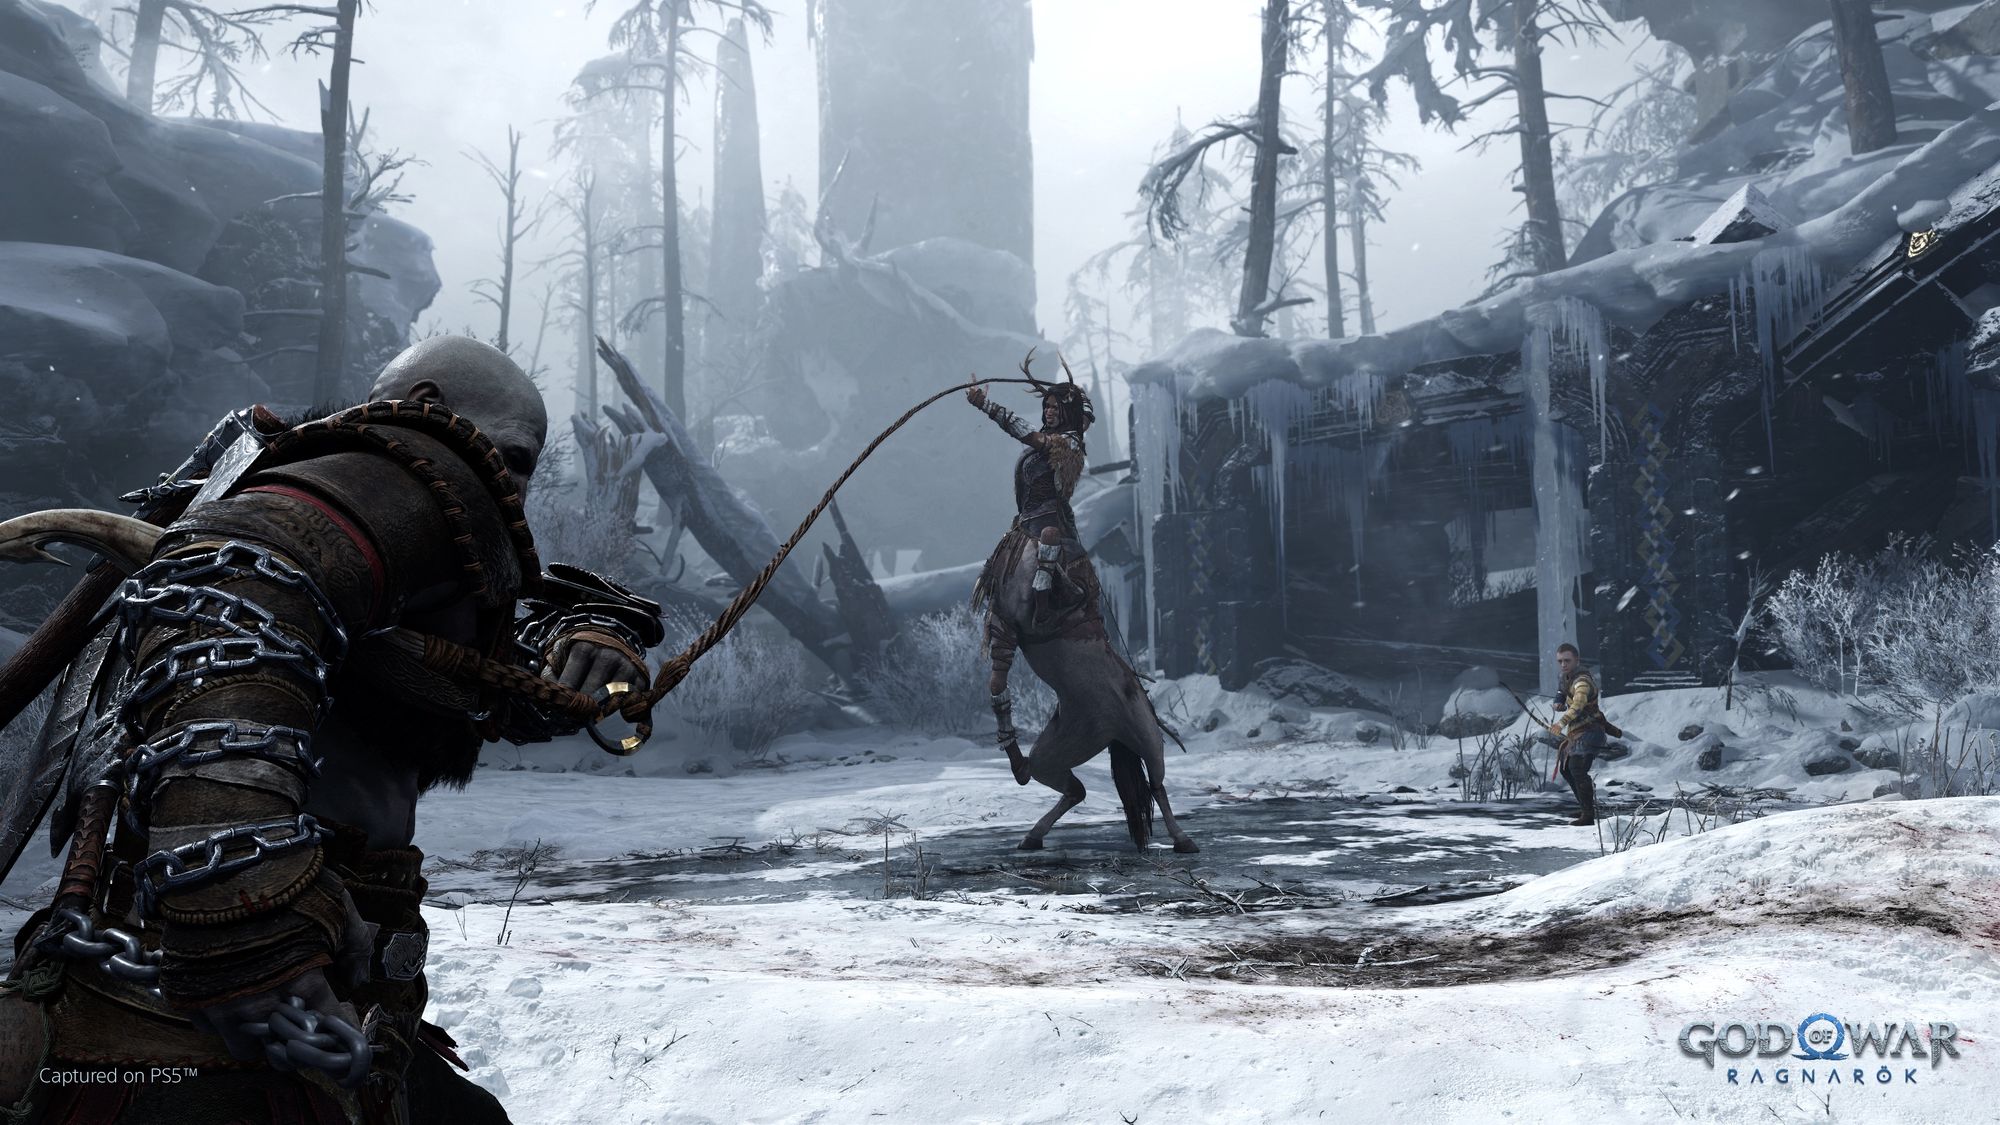 In-game capture of kratos and Atreus fighting the centaur like Huntress